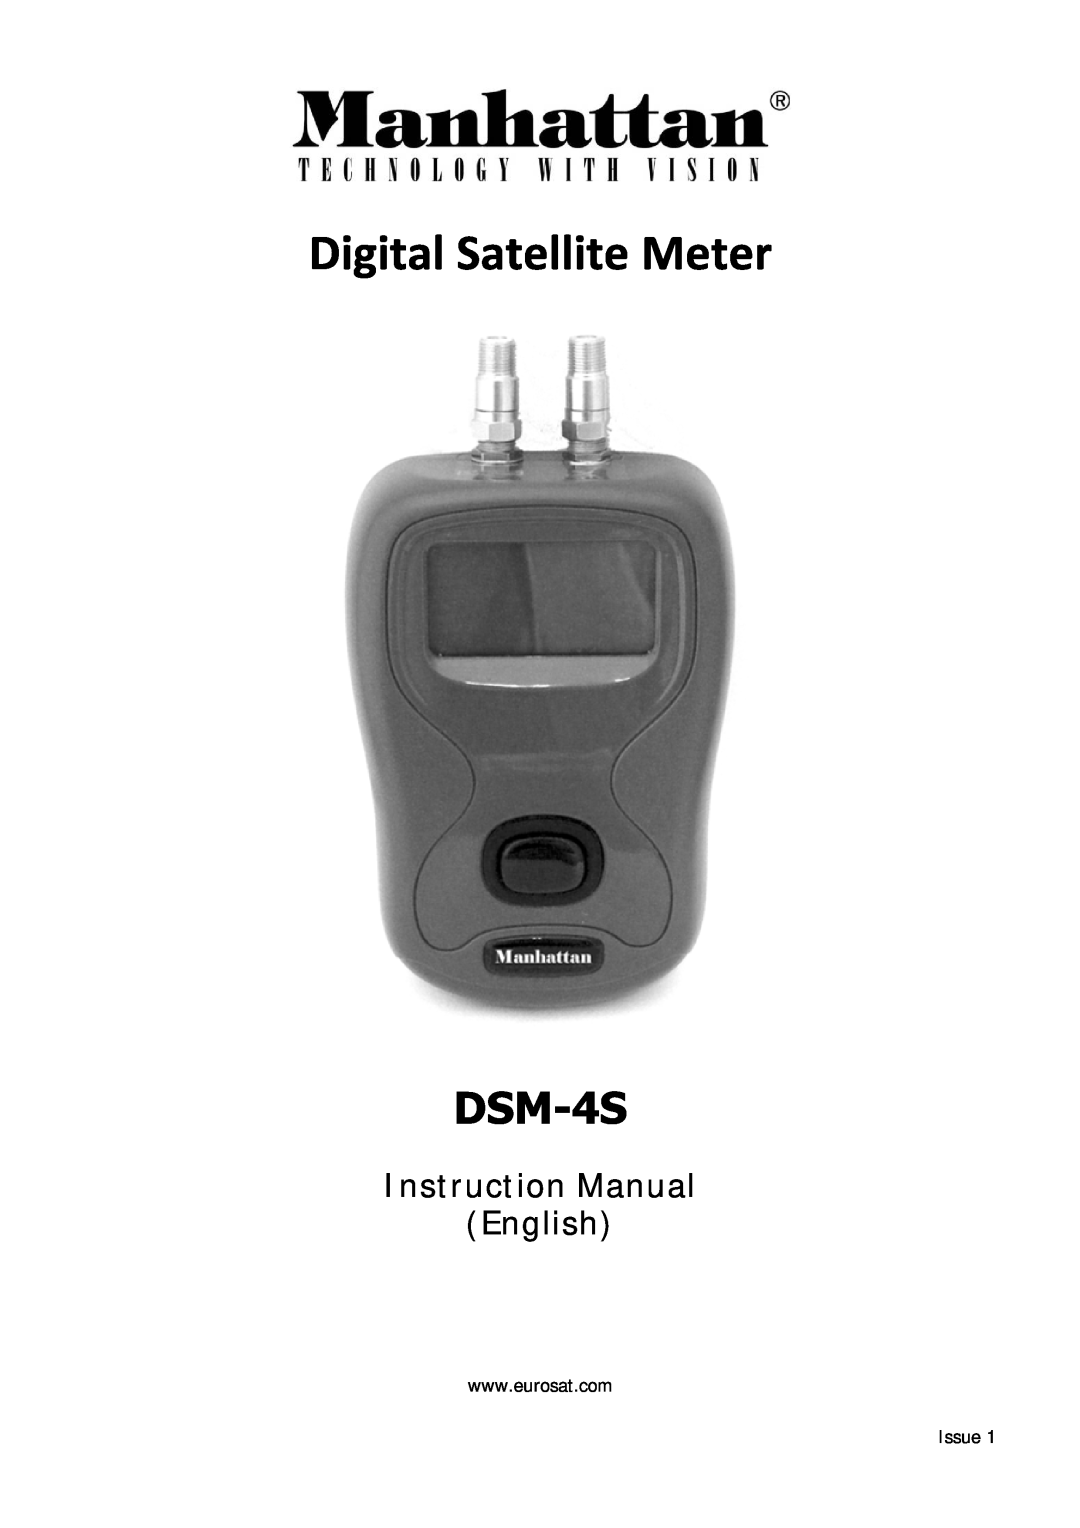 Manhattan Computer Products DSM-4S instruction manual Instruction Manual English, Issue 